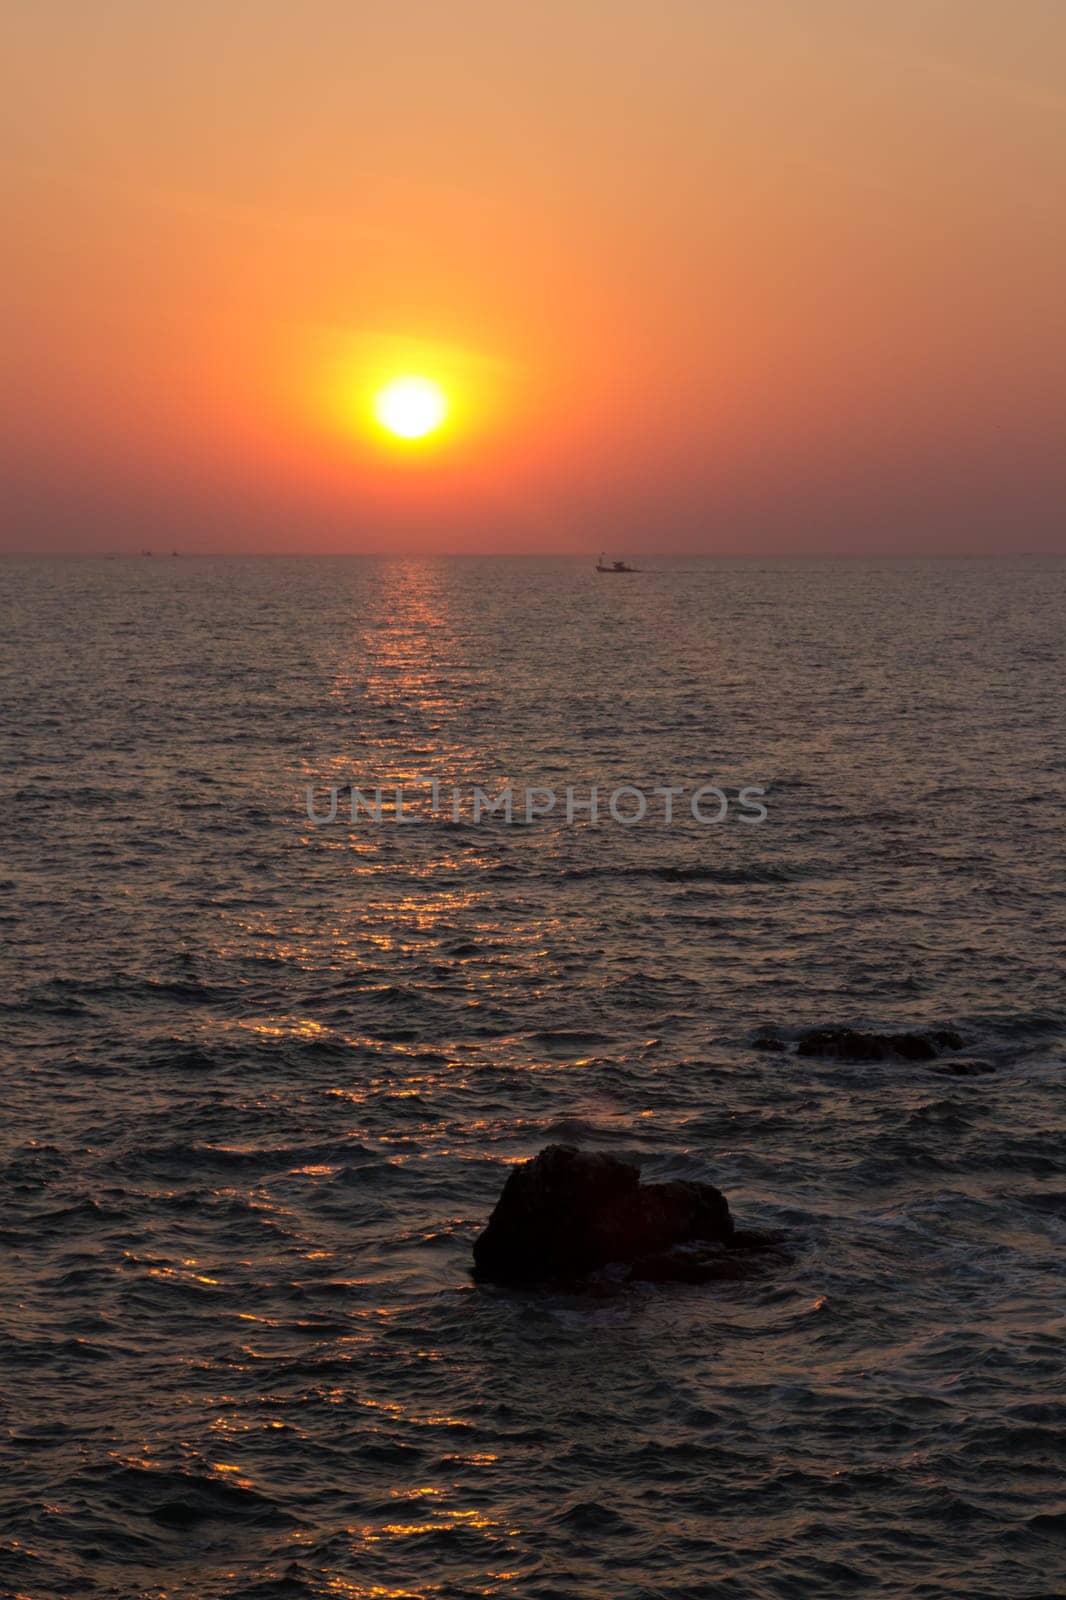 Sunset on the background of the cliffs of Goa by TimaRAI